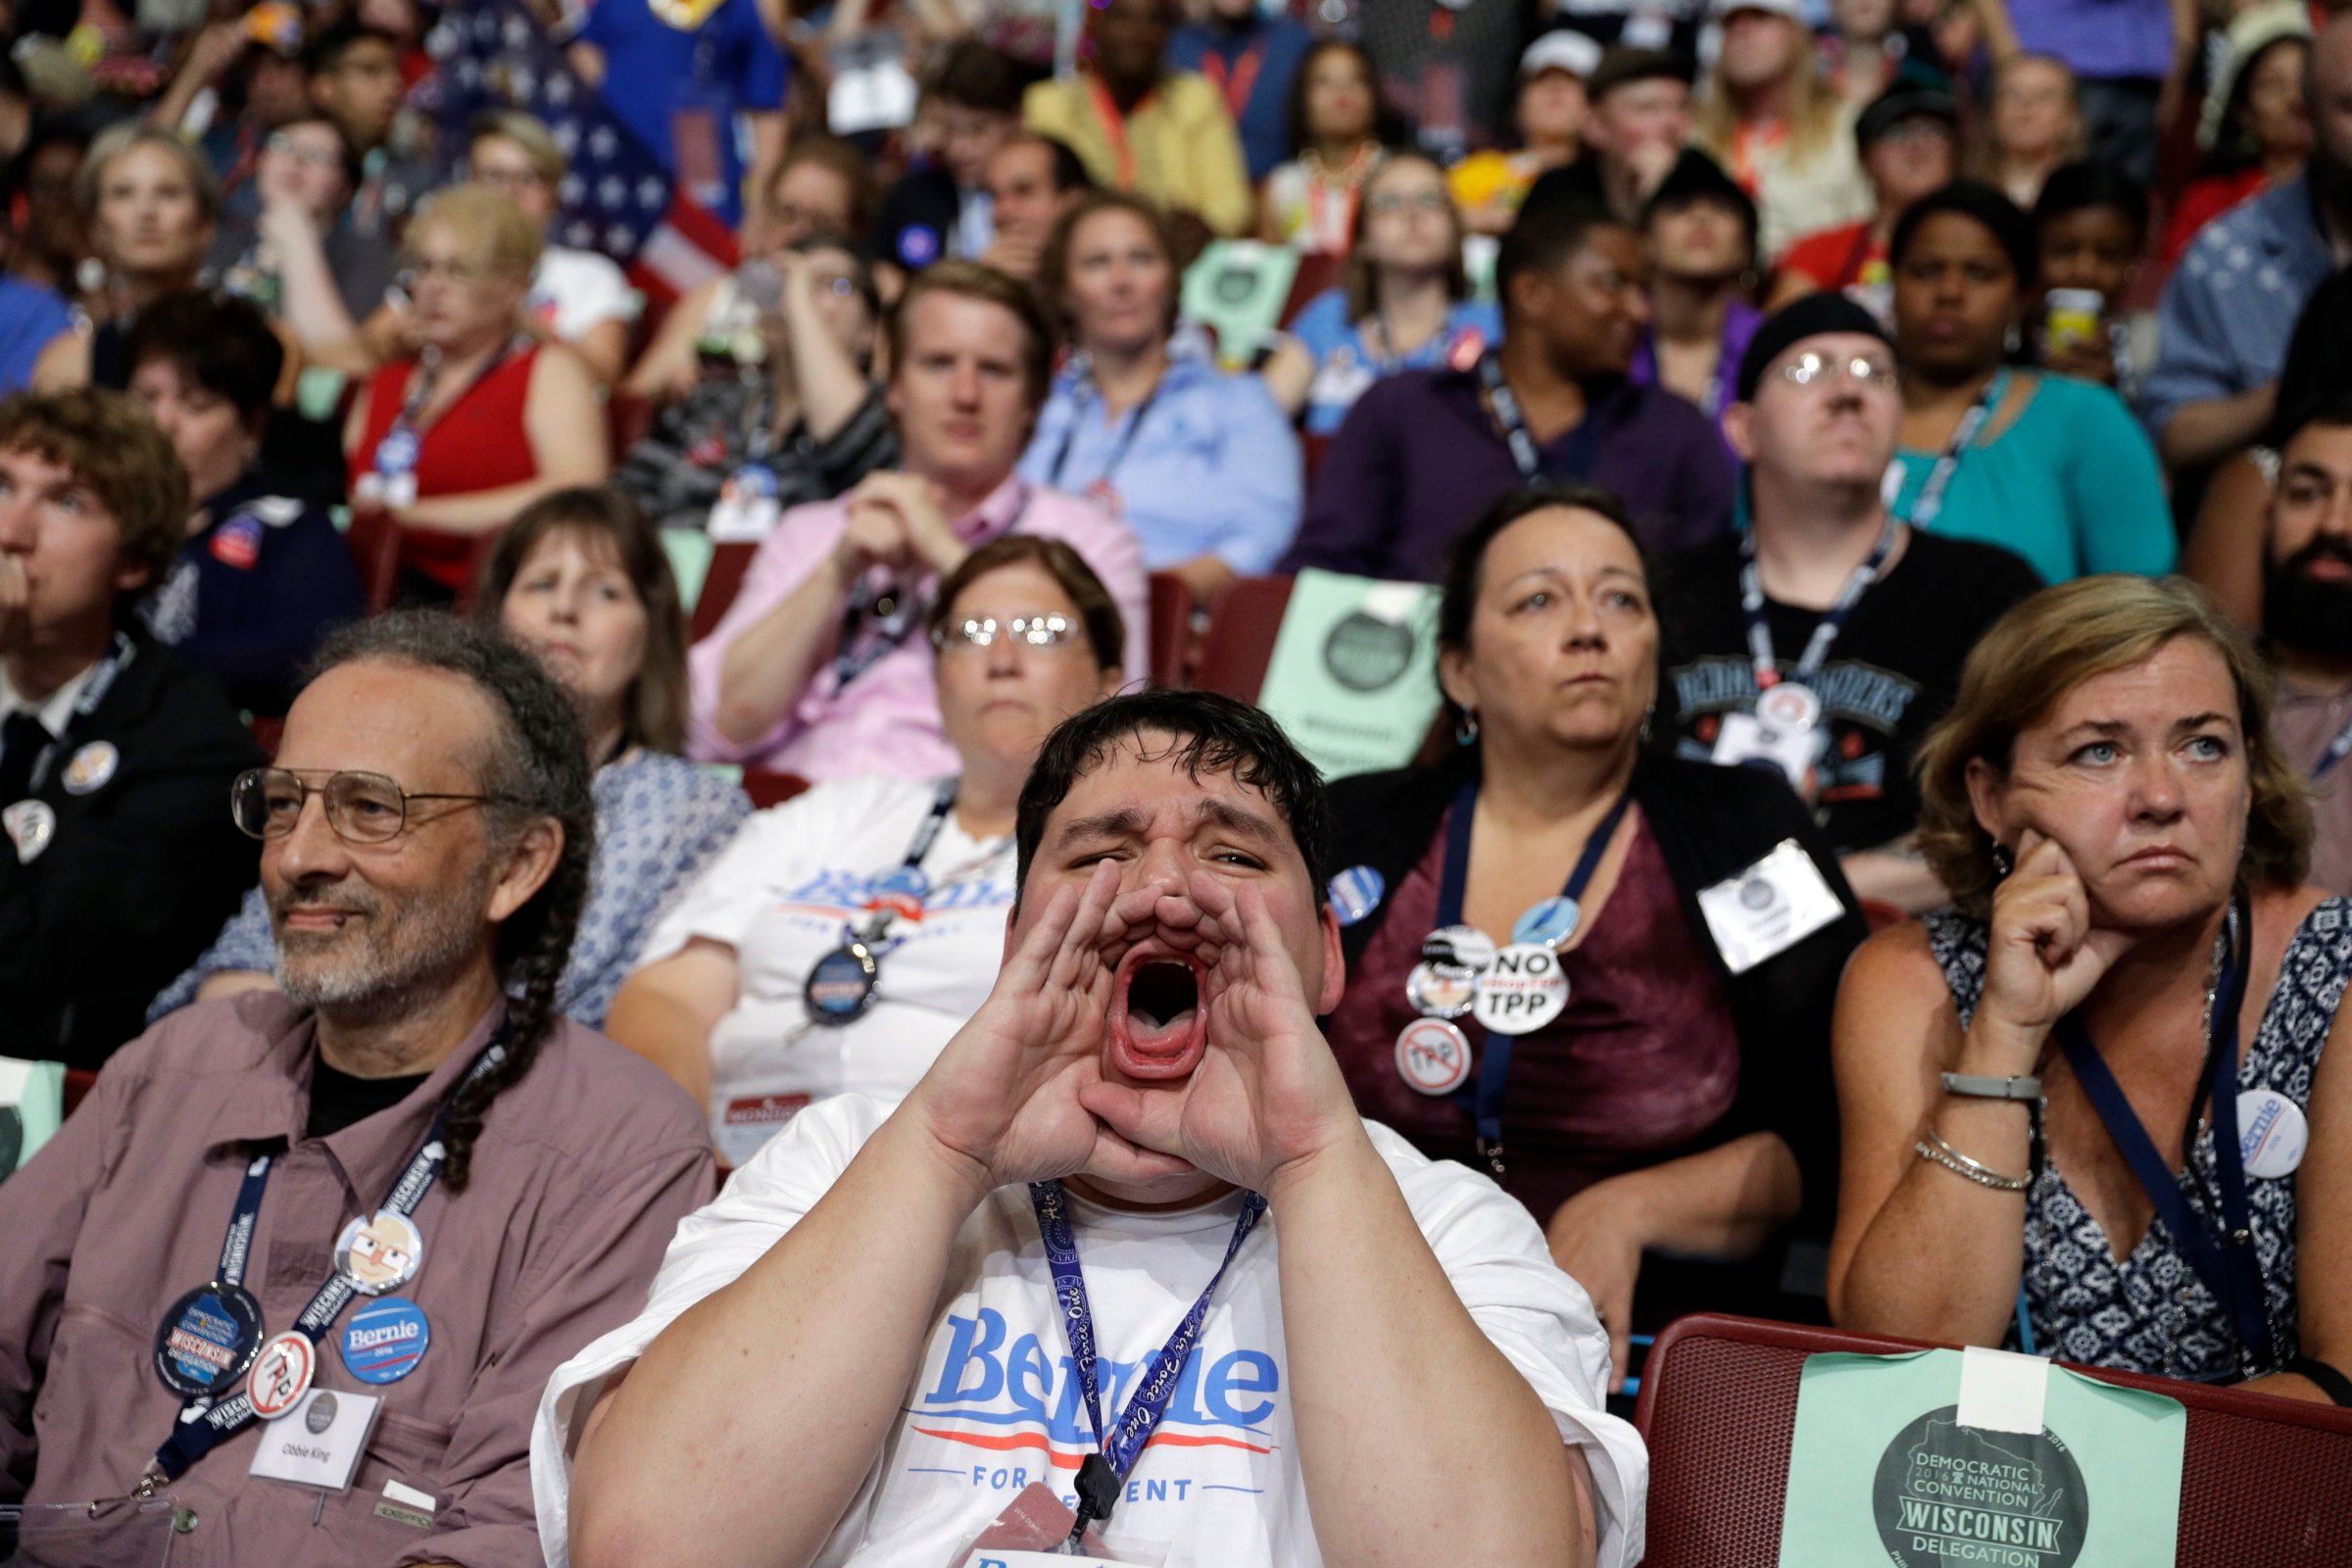 Ardent Bernie Sanders supporters hijacked the opening moments of the Democratic National Convention, repeatedly booing mentions of Hillary Clinton, chanting Sanders’ name and turning what was supposed to be a celebration into an ugly family feud. Supporter for former Democratic Presidential candidate, Sen. Bernie Sanders, I-Vt., John Stanley from DeForest Wis., reacts during the first day of the Democratic National Convention in Philadelphia, Monday, July 25, 2016.